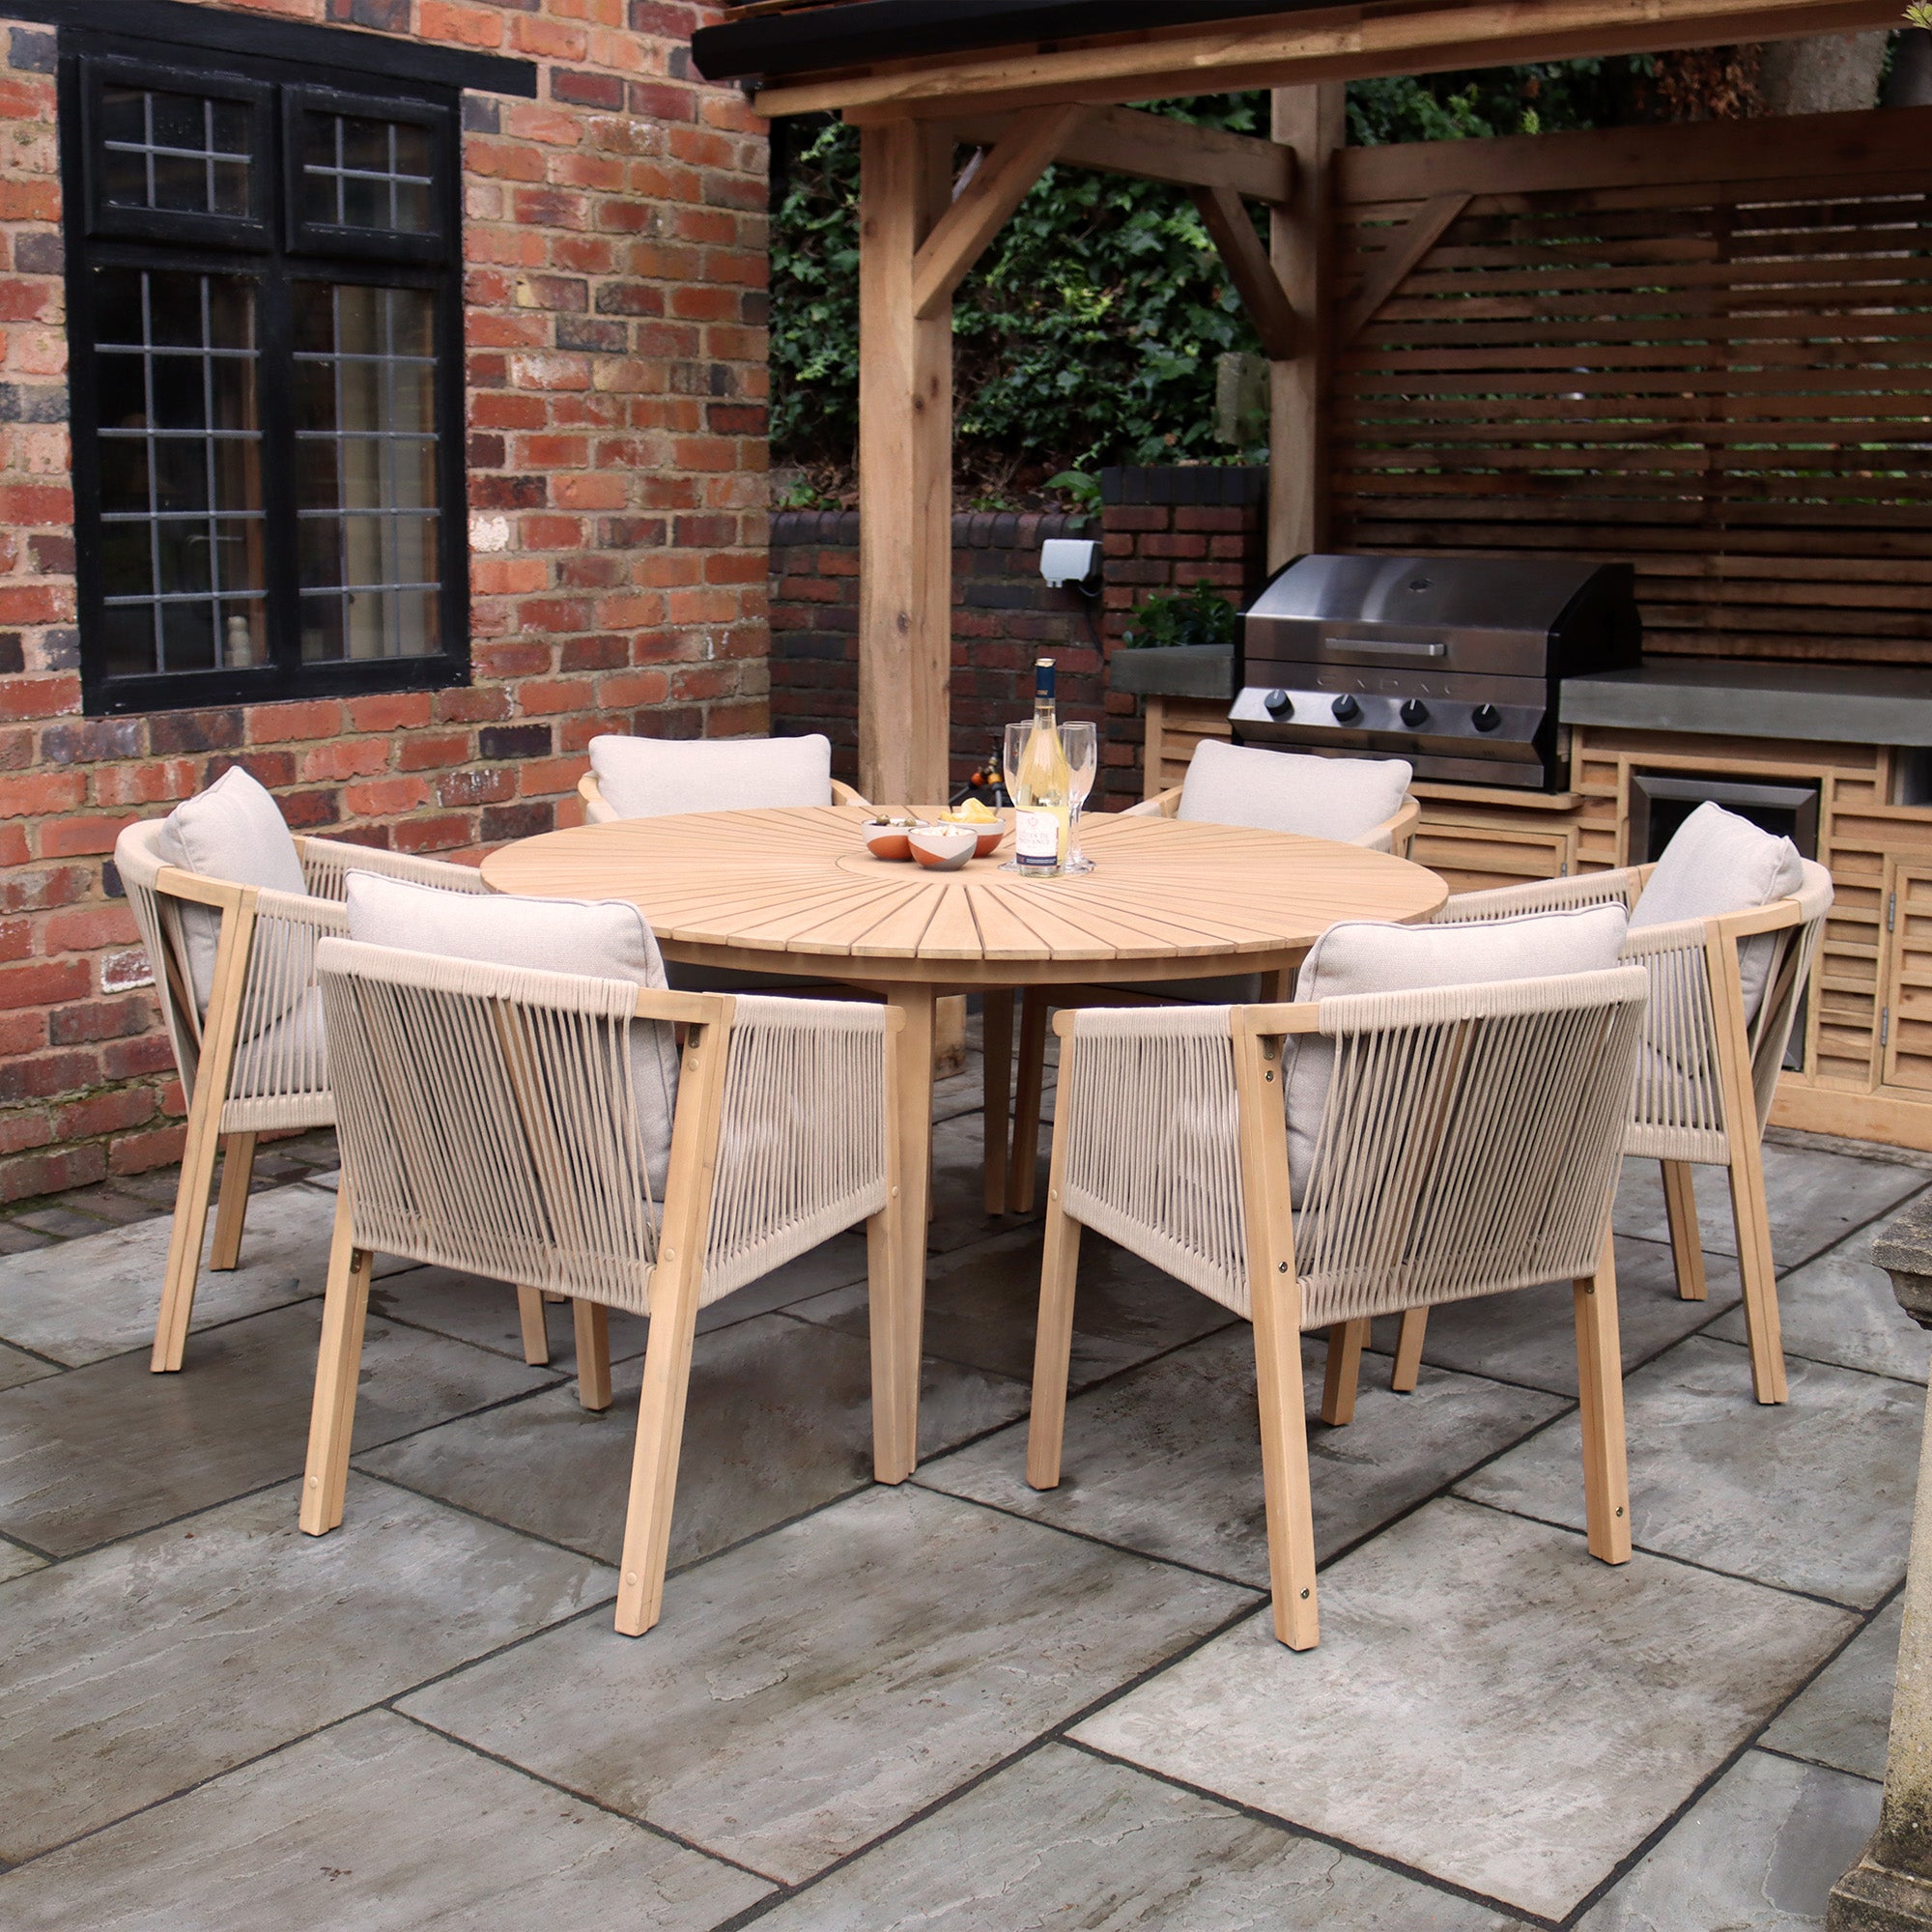 Photos - Garden Furniture Roma 6 Seater Dining Set with 6  Chairs Natural 